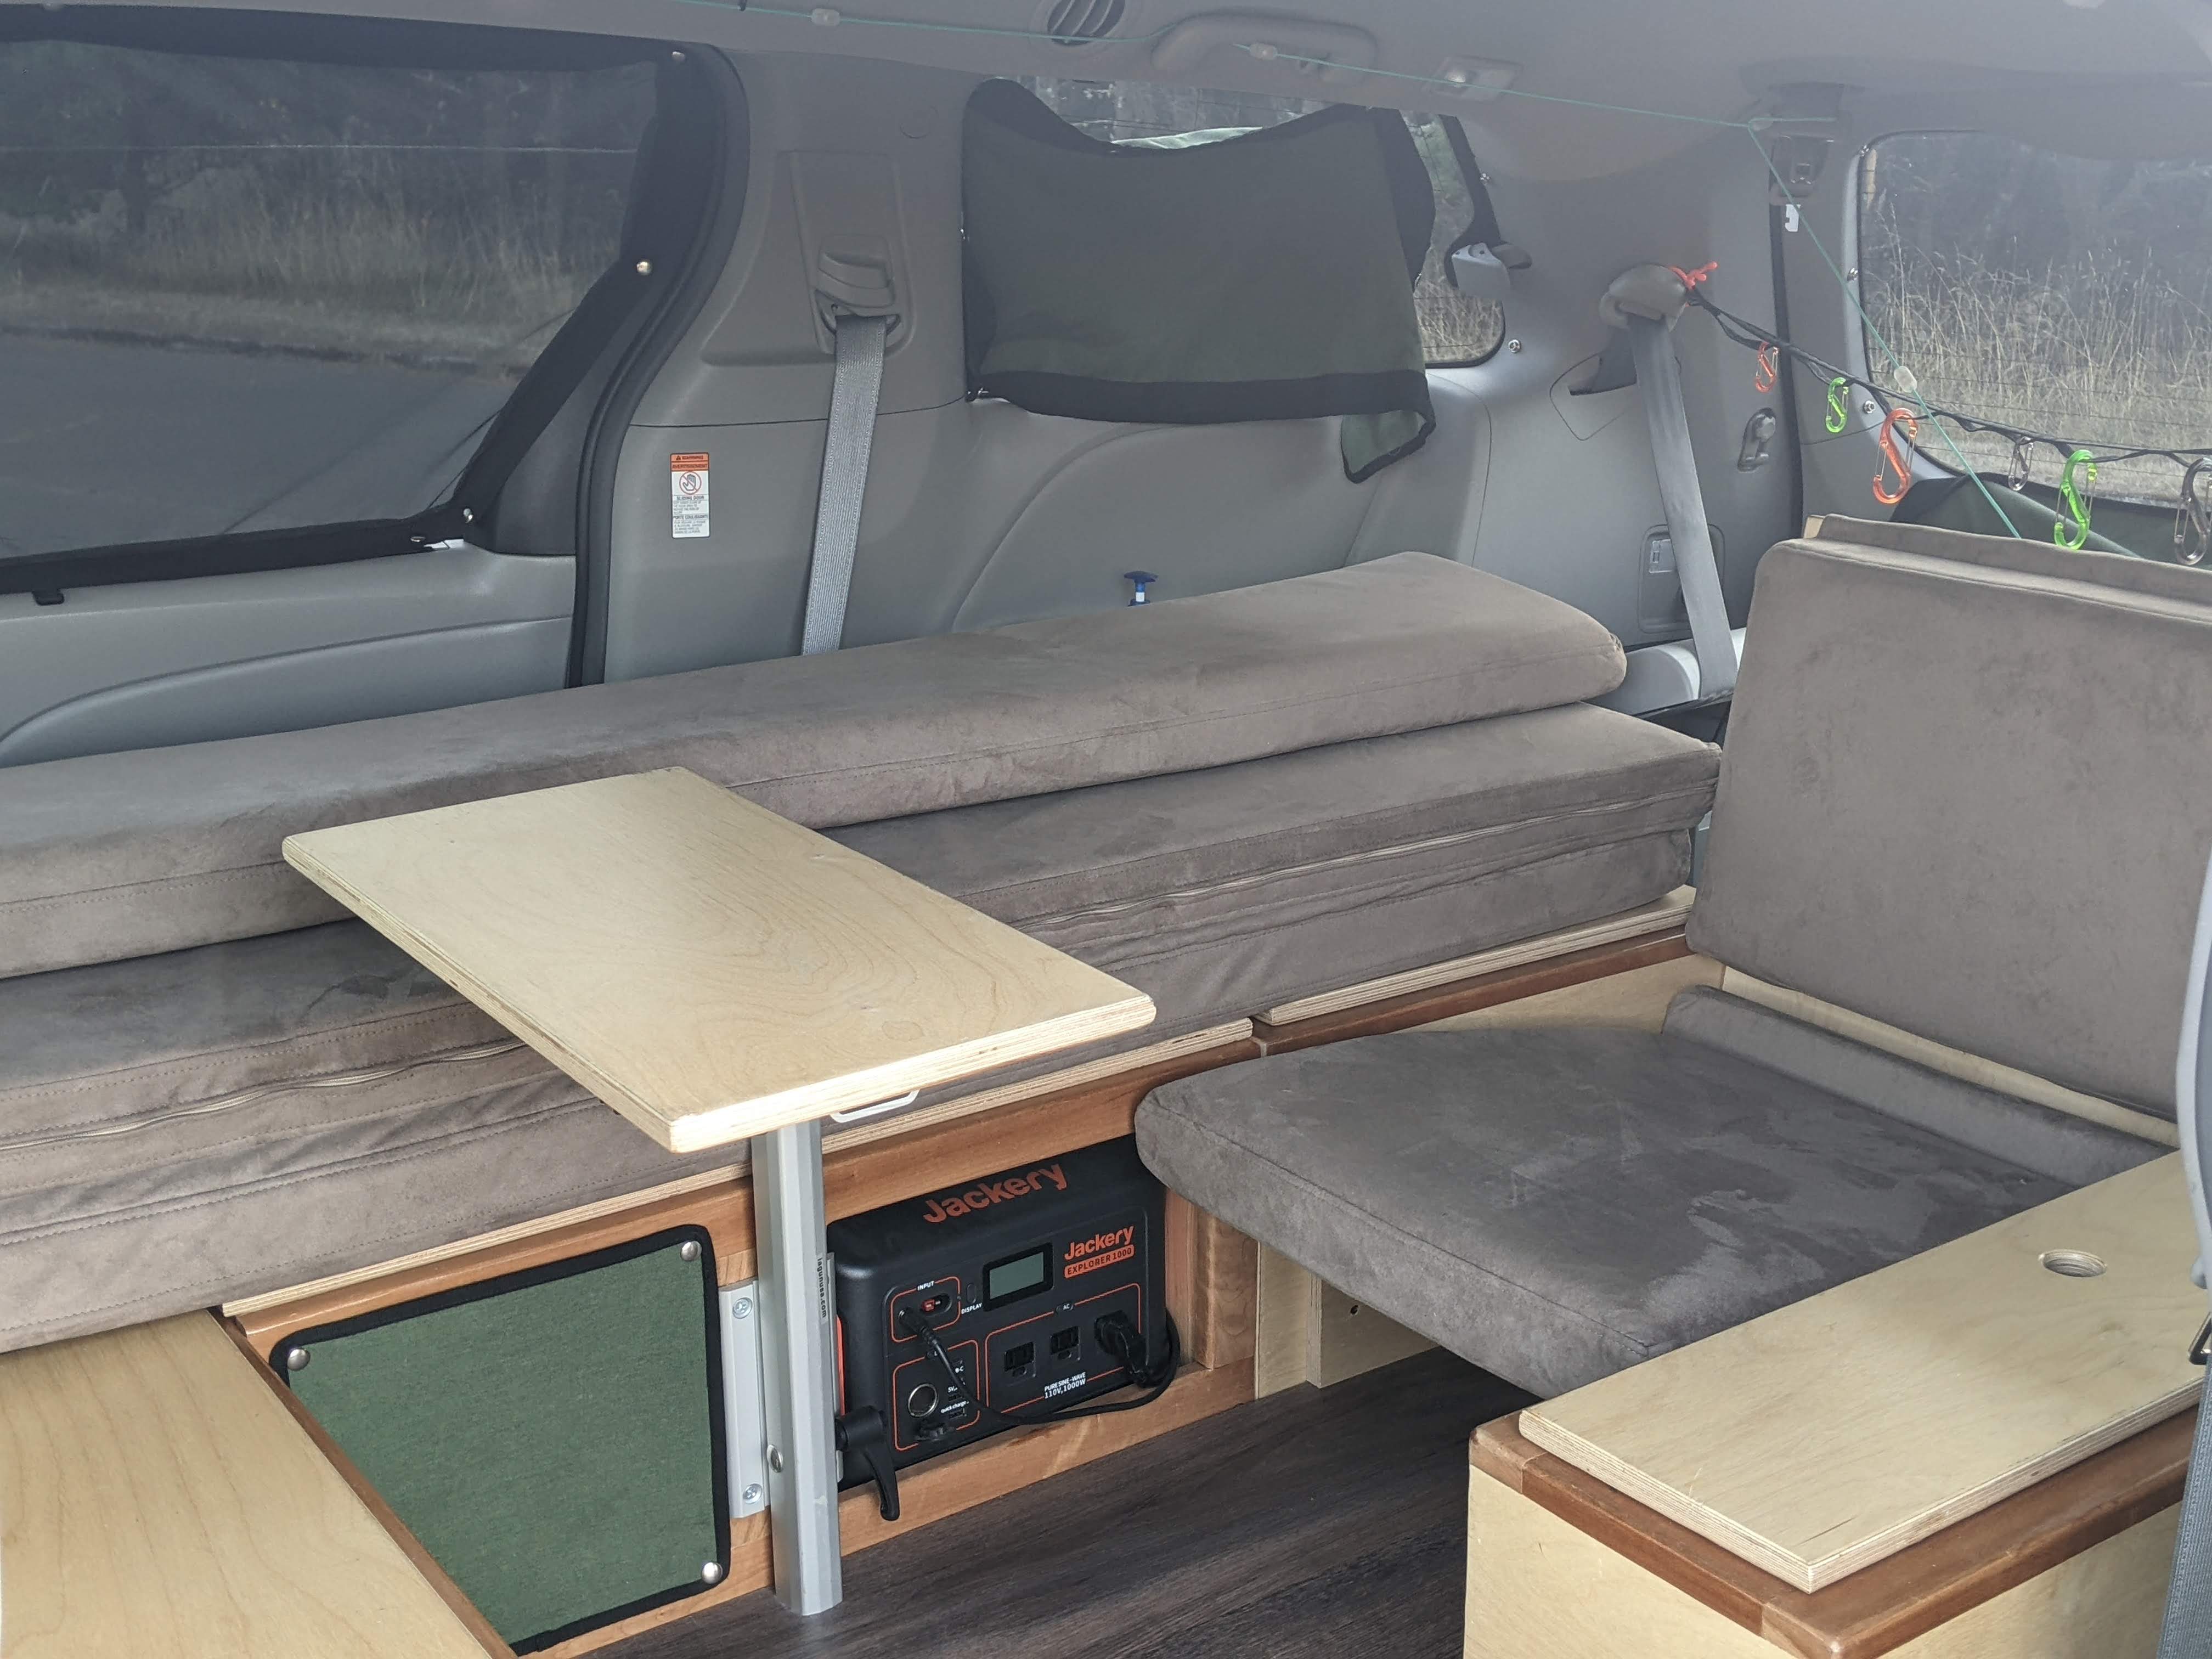 Photo showing the inside of a 2017 Toyota Sienna Campervan